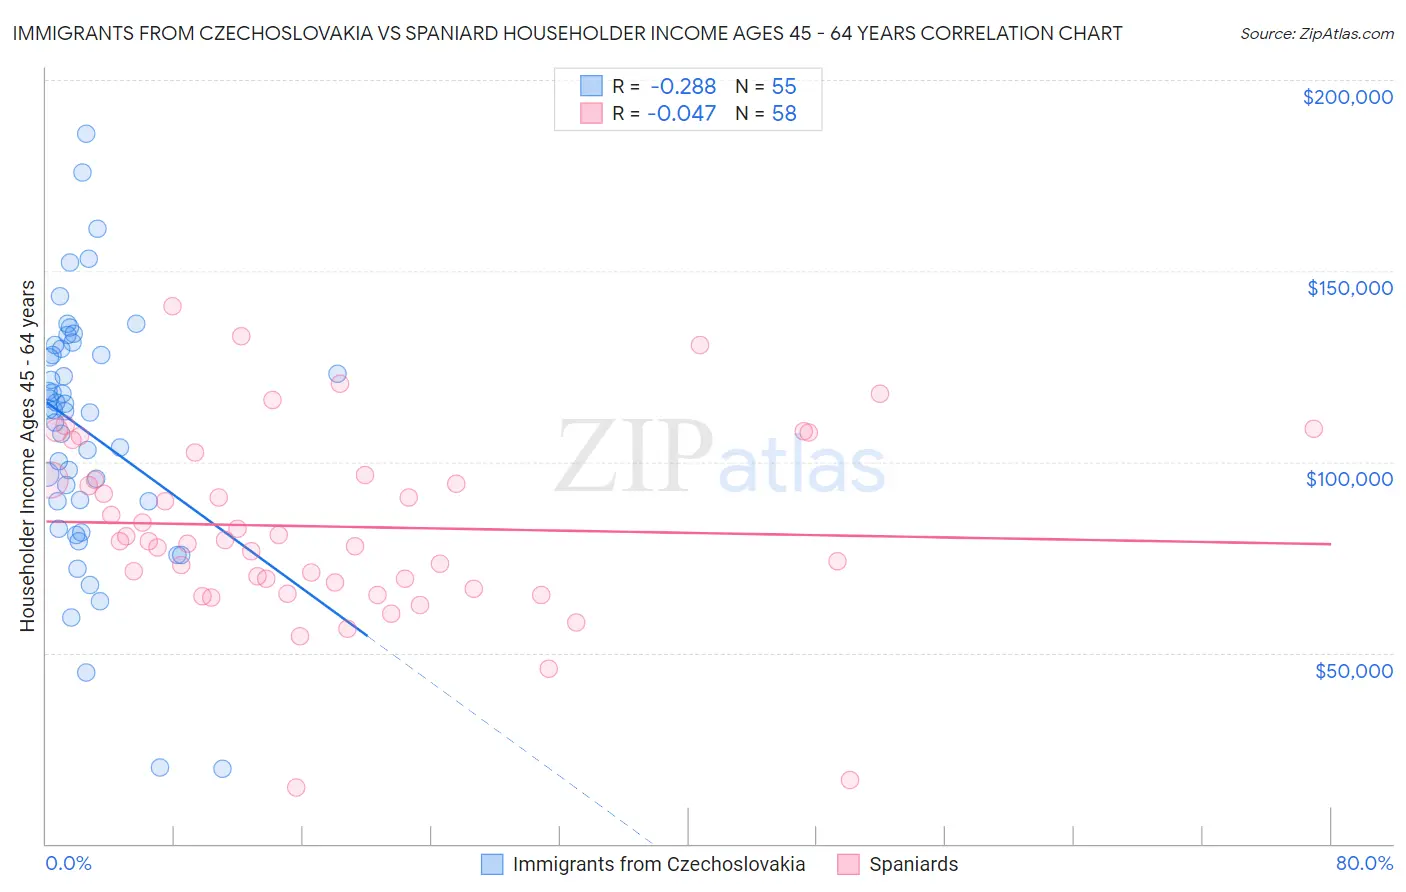 Immigrants from Czechoslovakia vs Spaniard Householder Income Ages 45 - 64 years